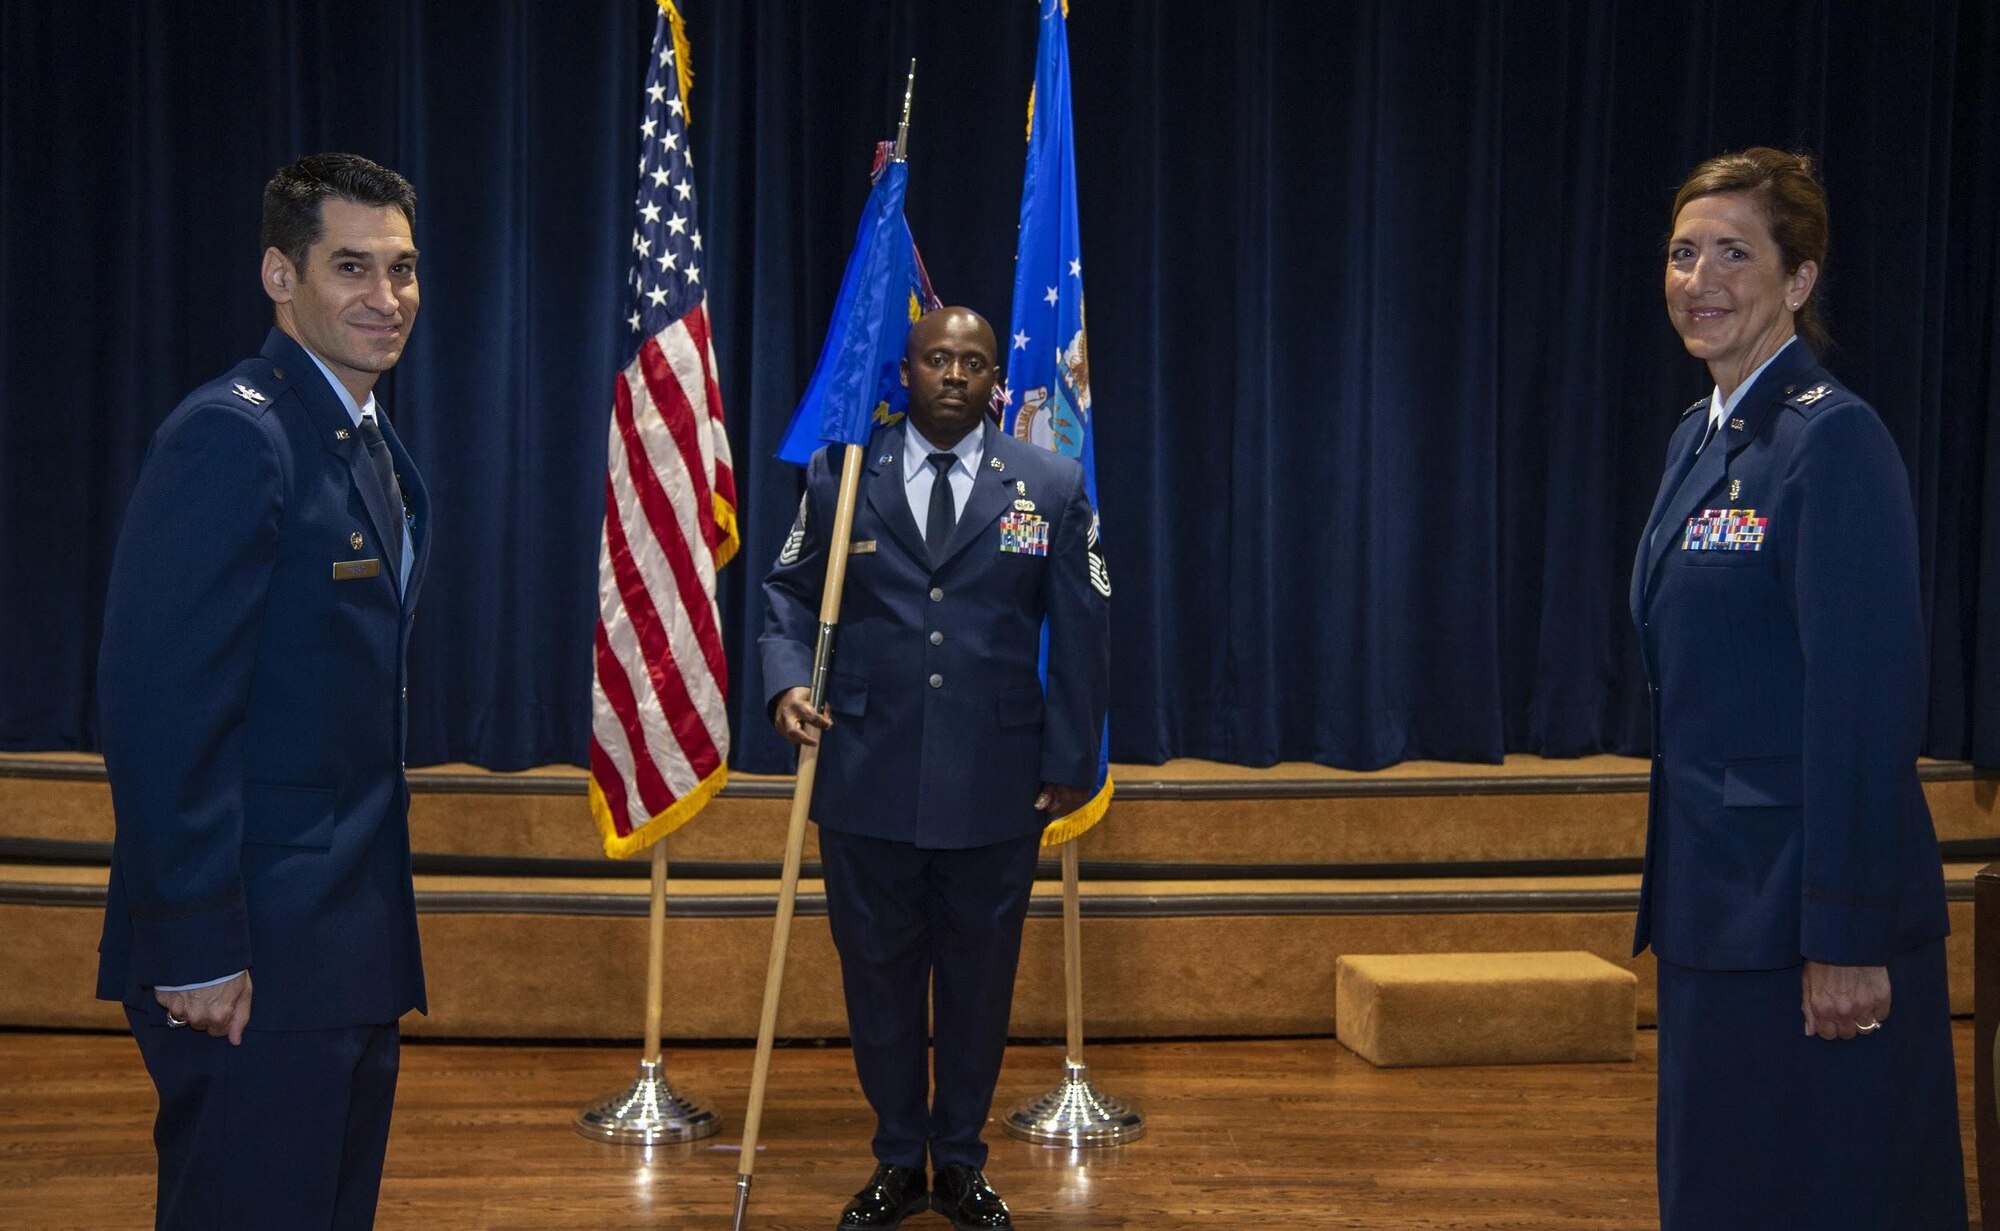 U.S. Air Force Col. Benjamin Robins, 6th Air Refueling Wing commander, ceremoniously passes the 6th Medical Group (MDG) guidon to Col. Courtney Finkbeiner, the in-coming 6th MDG commander during a change of command ceremony at MacDill Air Force Base, Fla., June 26, 2020.